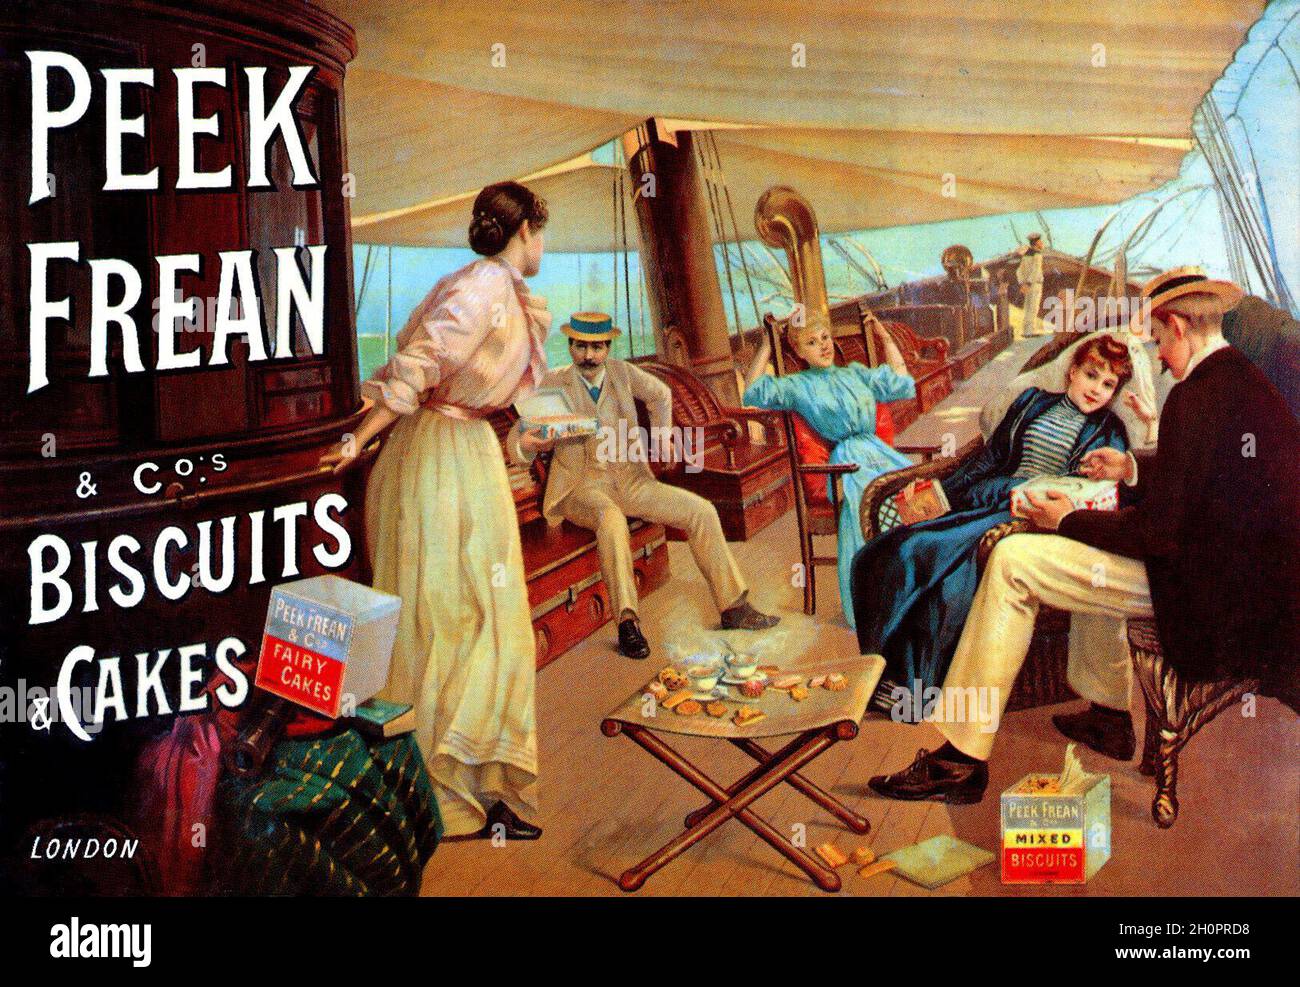 Vintage Peek Frean biscuits and cakes advert Stock Photo